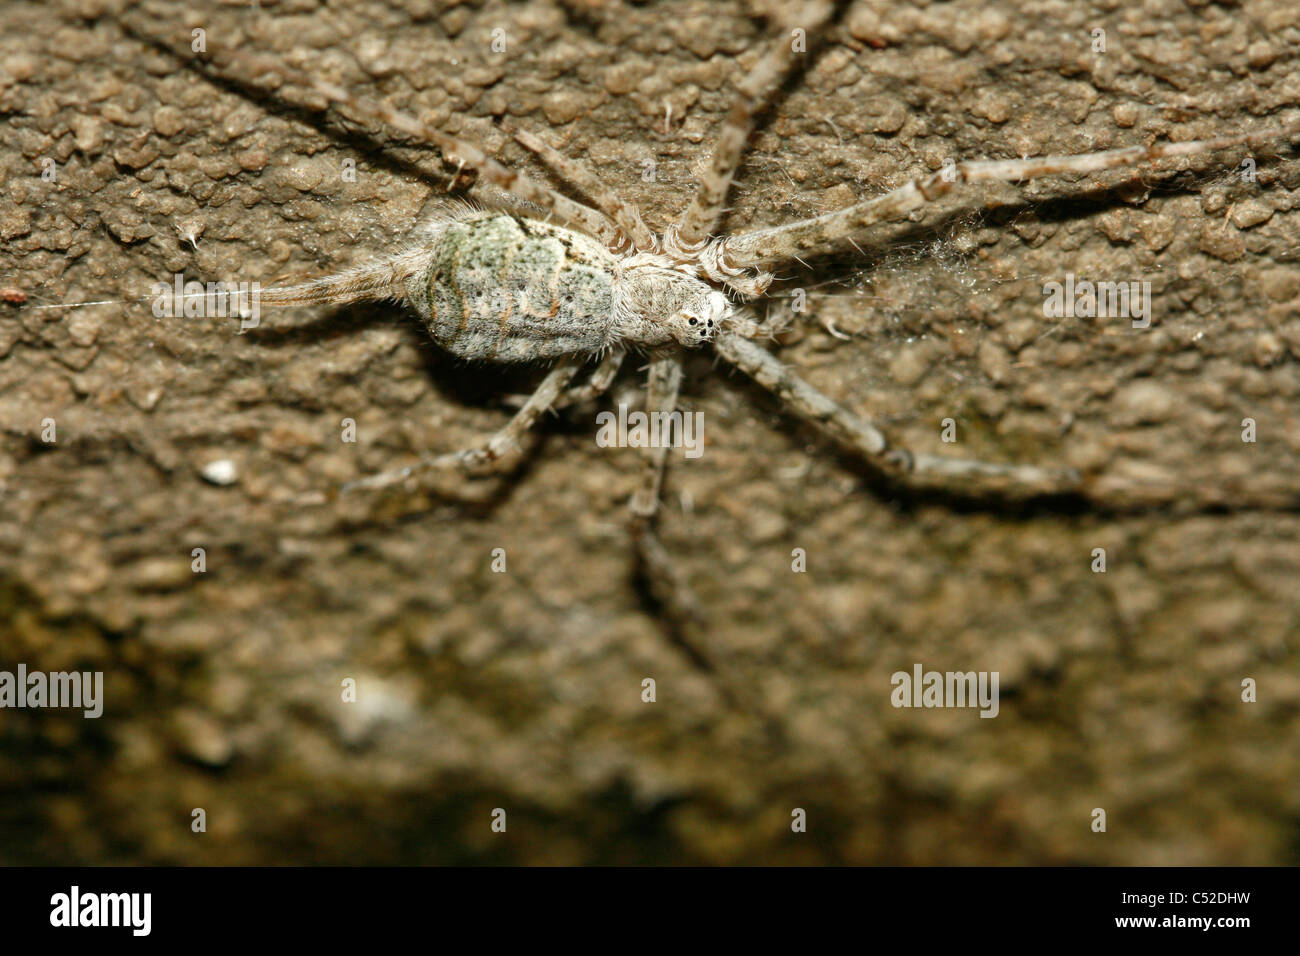 Spider well camouflaged against a wall, Uganda Stock Photo